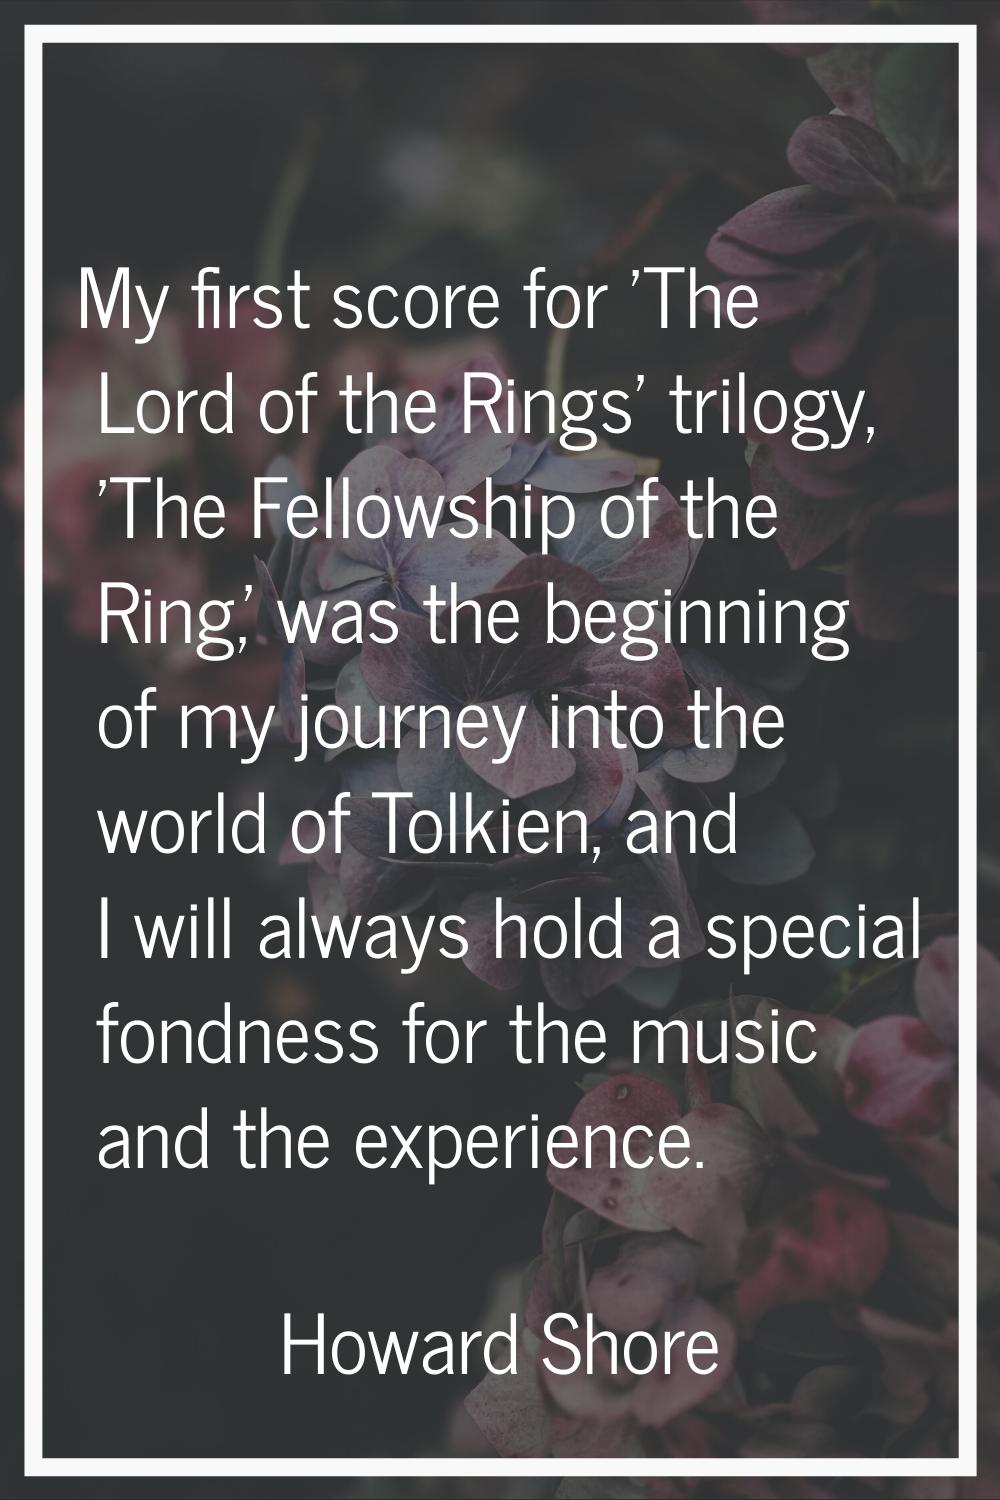 My first score for 'The Lord of the Rings' trilogy, 'The Fellowship of the Ring,' was the beginning